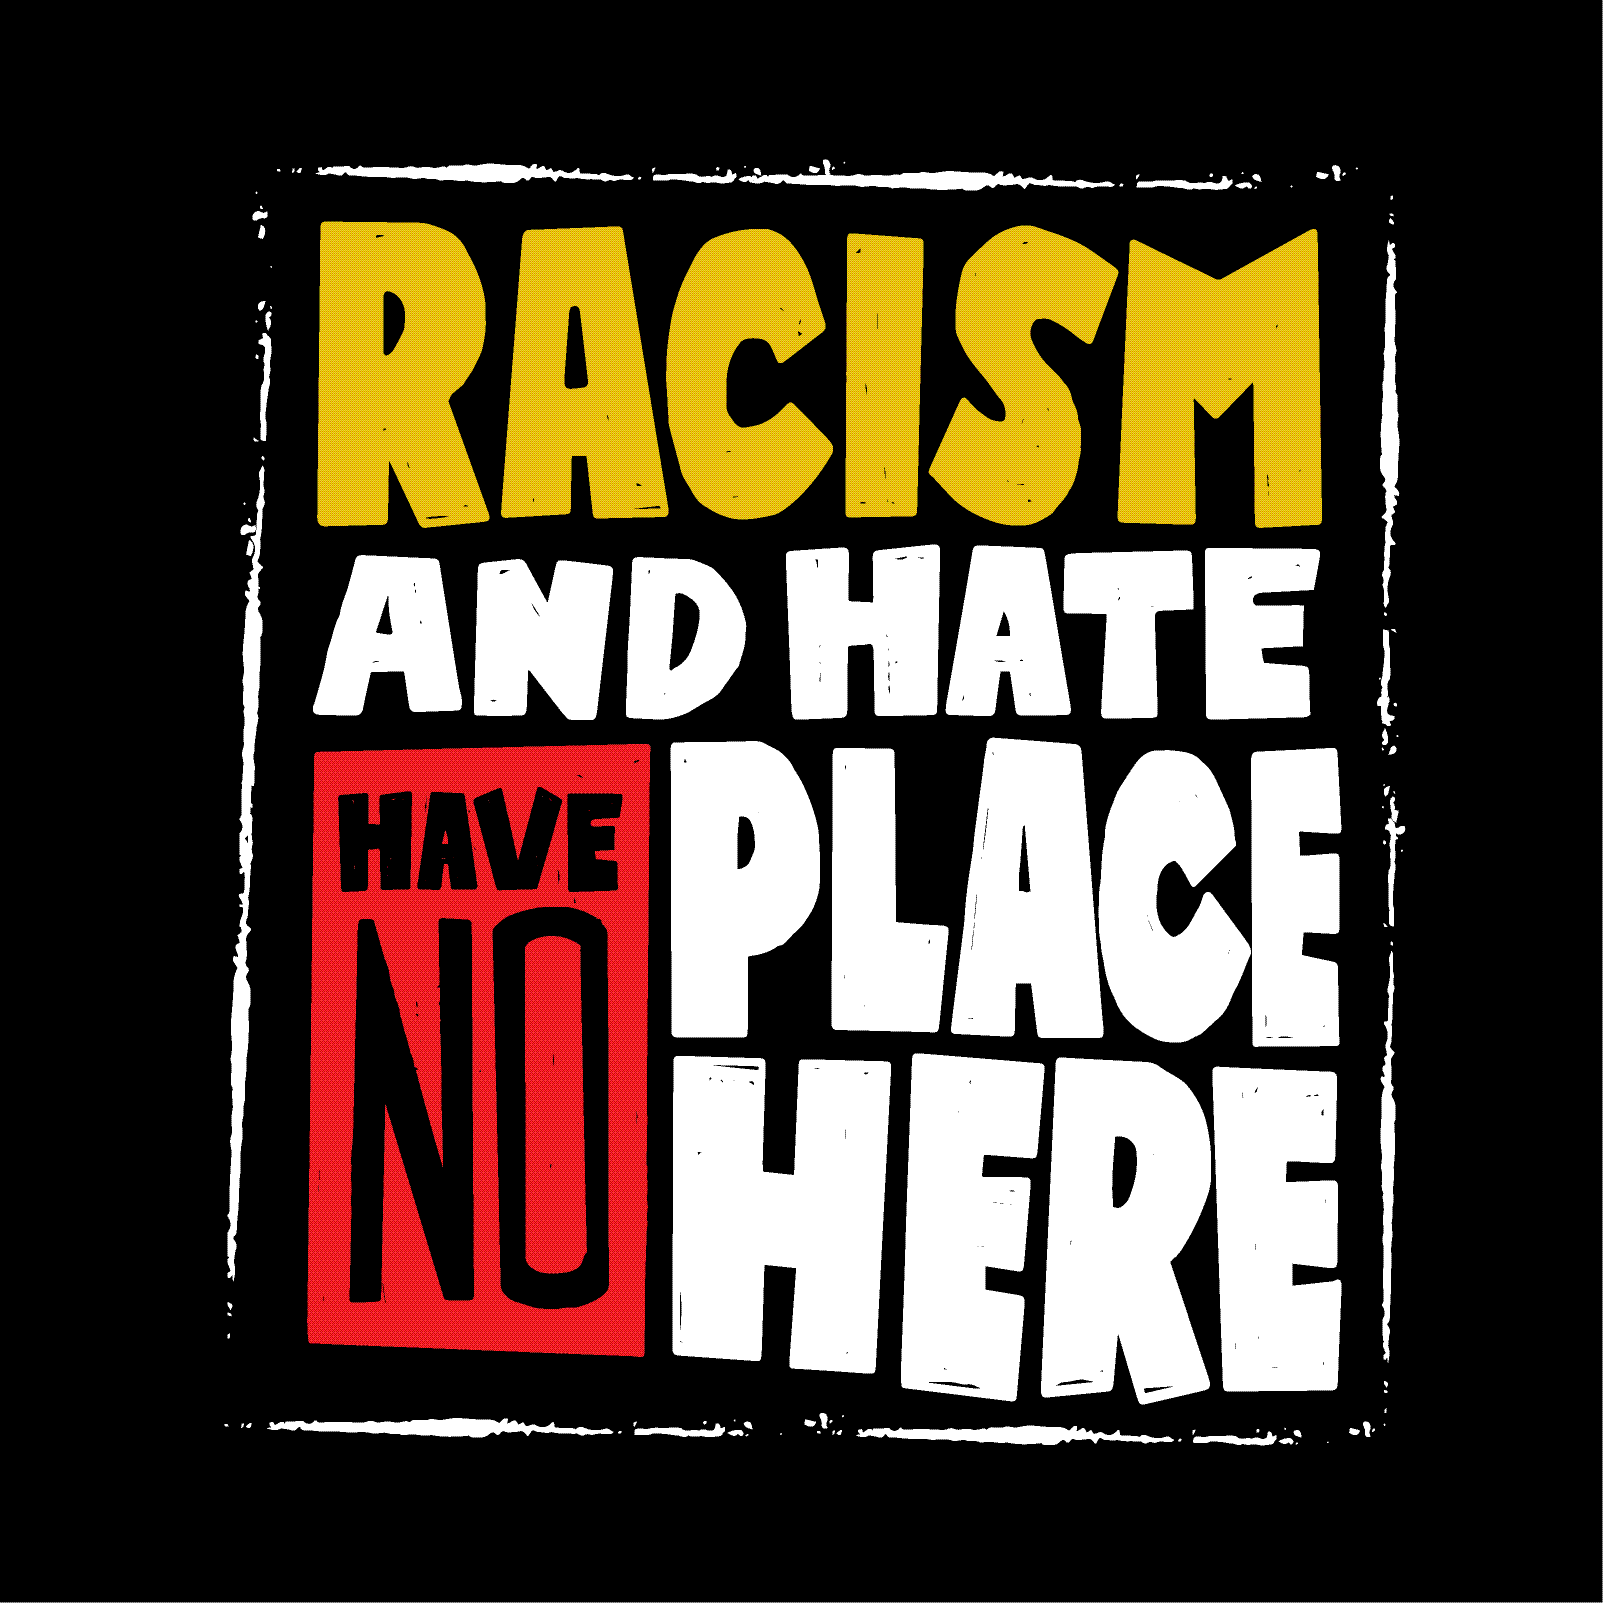 Racism and hate have no place here